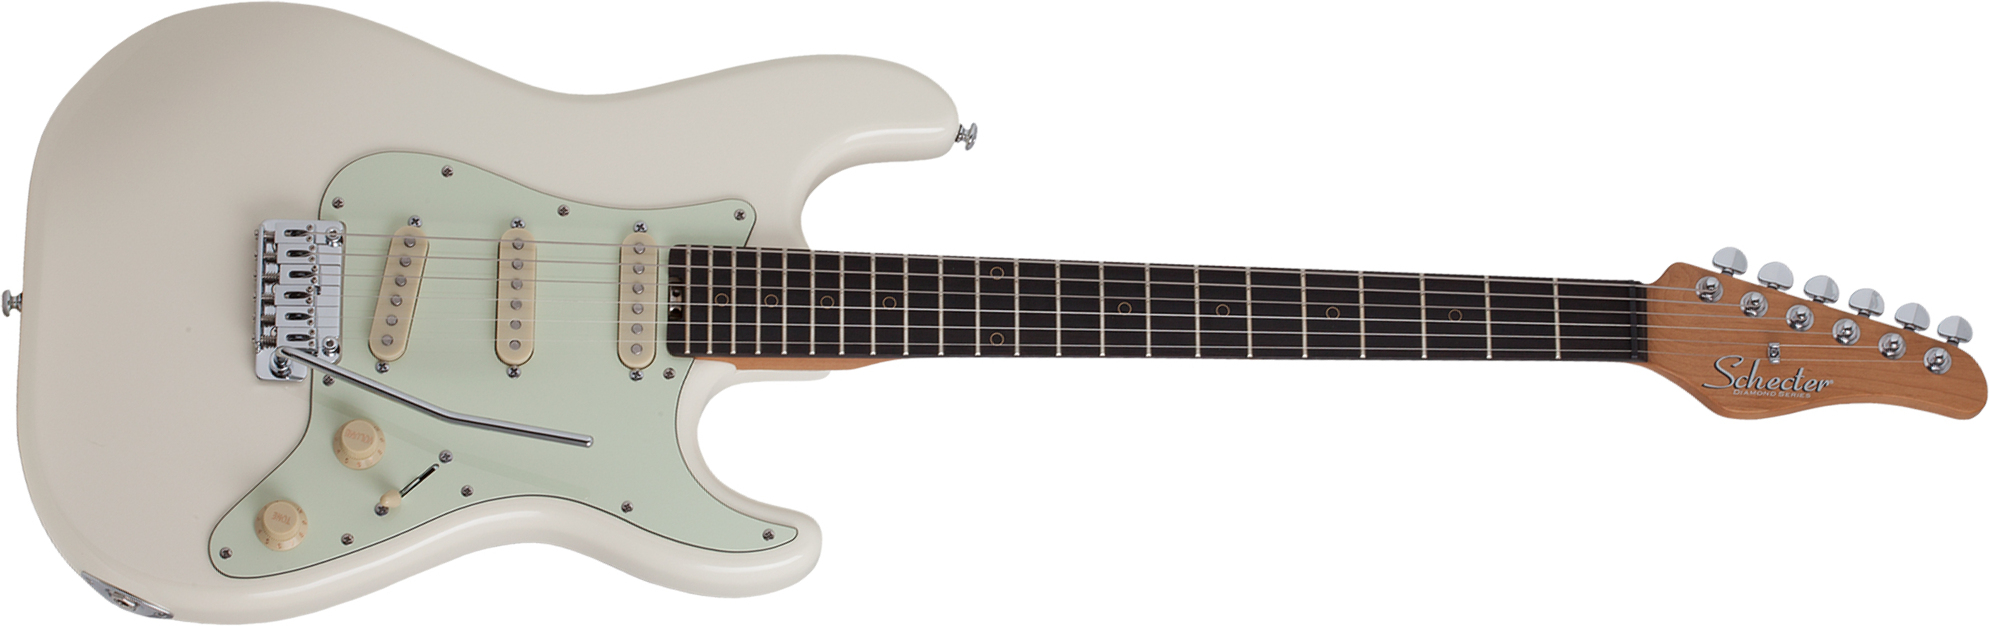 Schecter Nick Johnston Traditional Signature 3s Trem Eb - Atomic Snow - Str shape electric guitar - Main picture